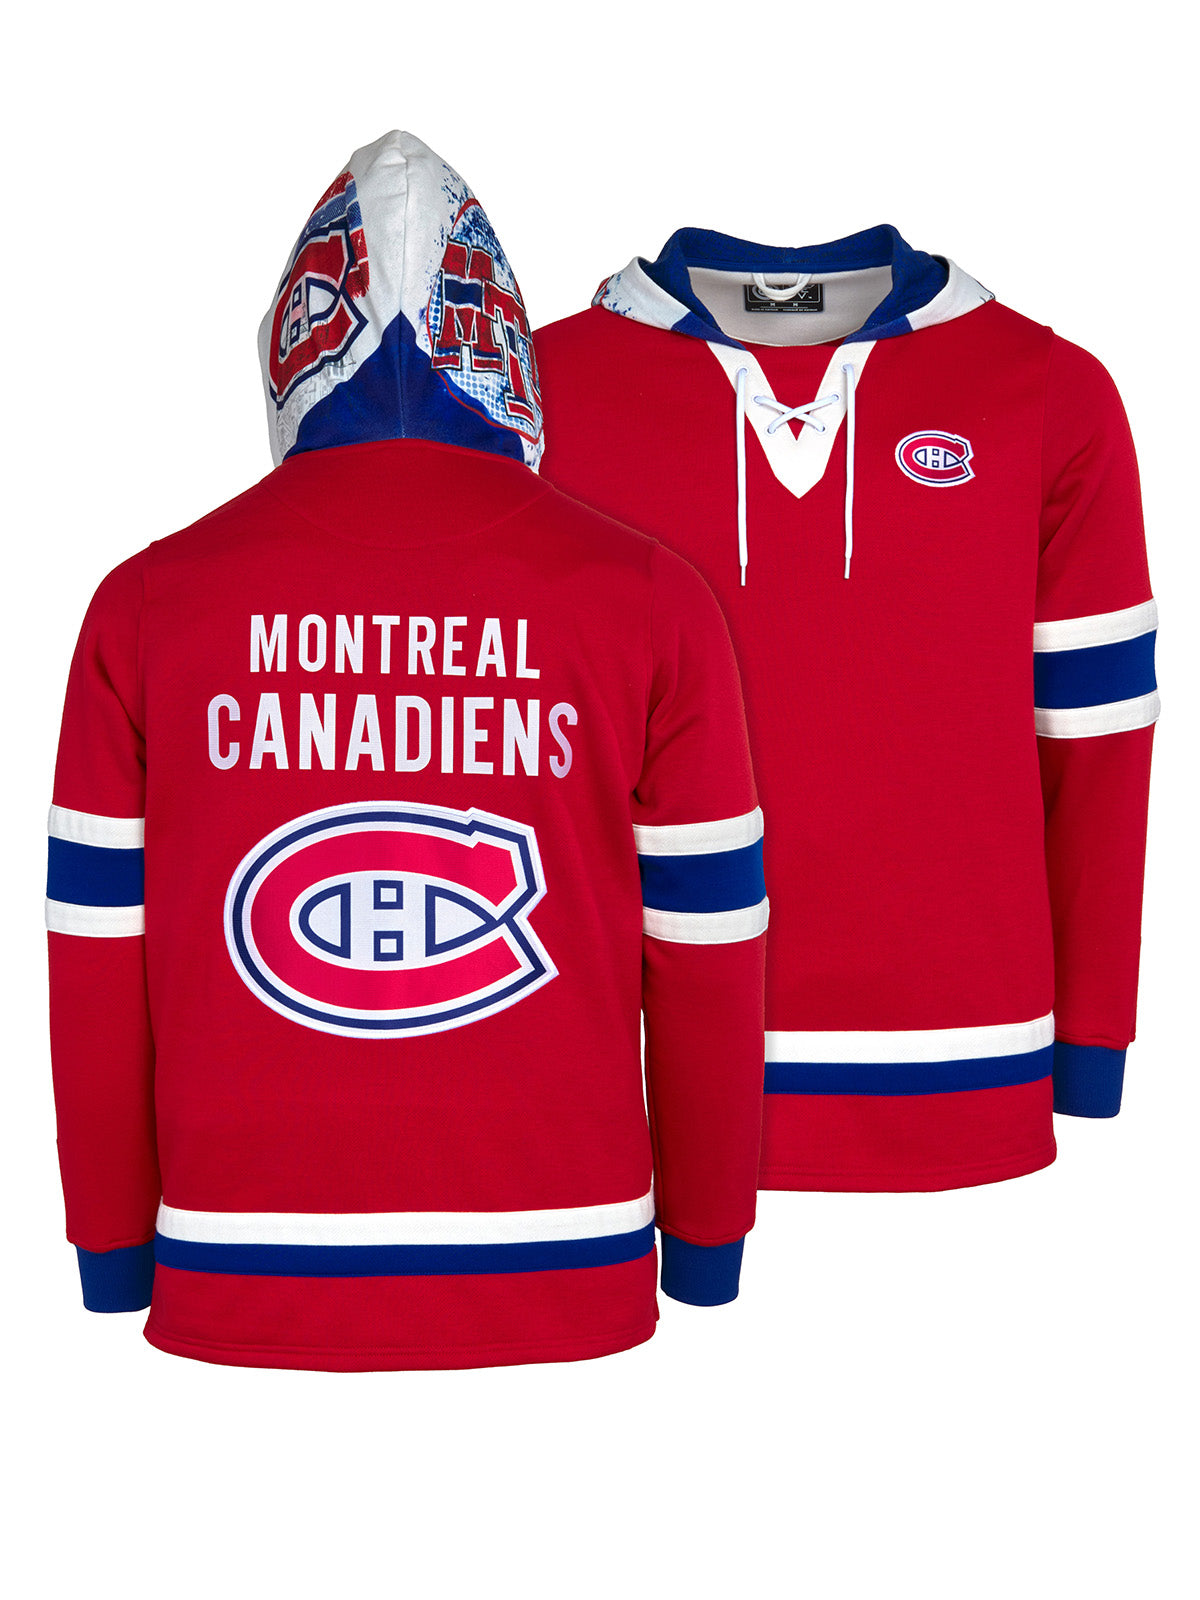 Montreal Canadiens Lace-Up Hoodie - Hand drawn custom hood designs with all the team colors and craftmanship to replicate the gameday jersey of this NHL hoodie